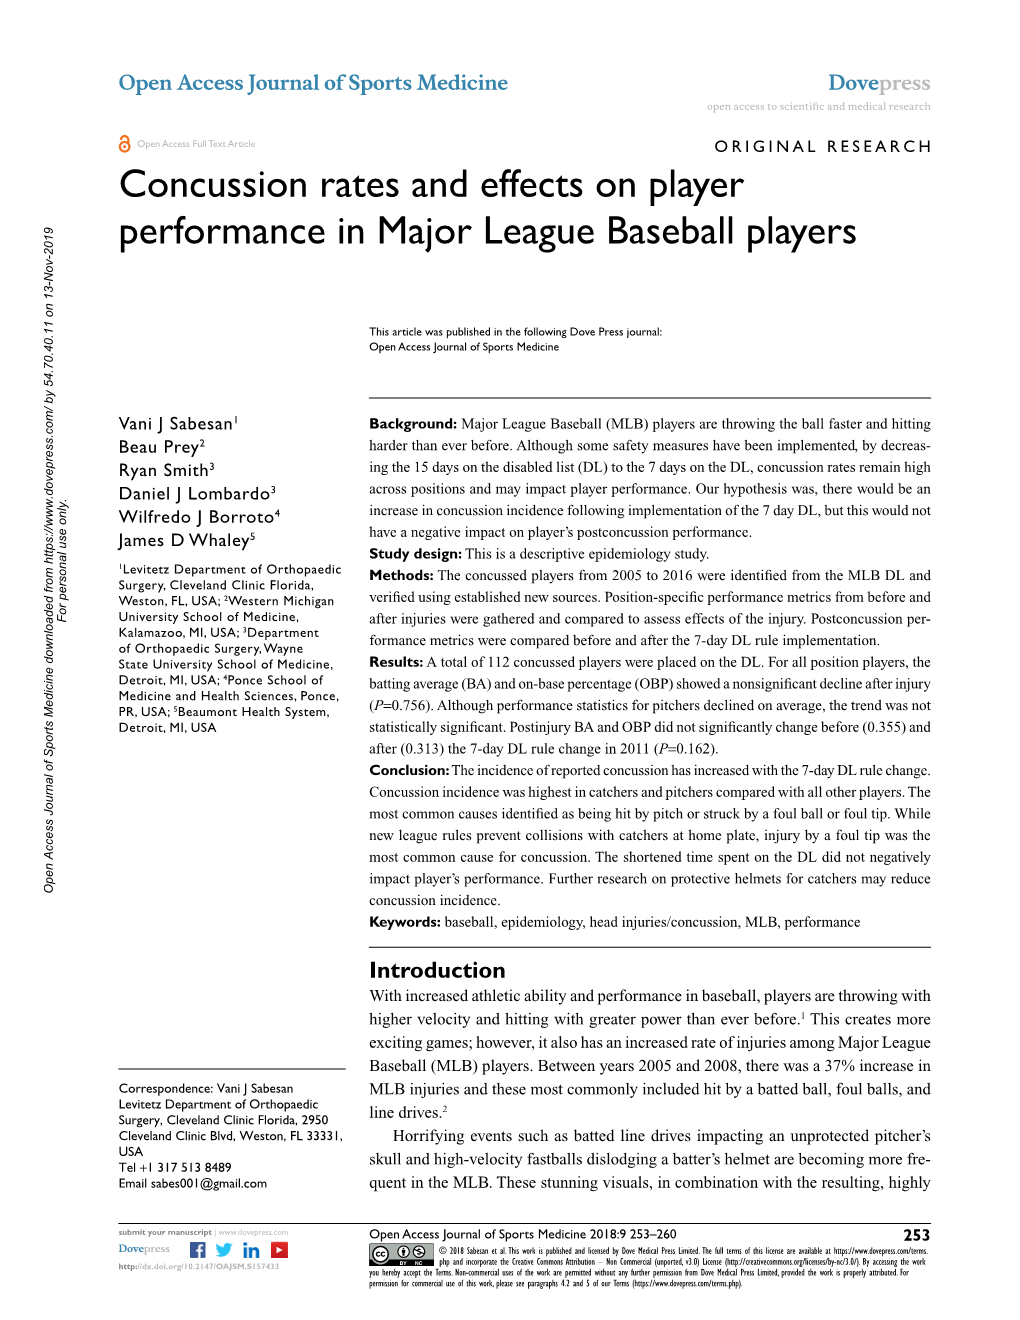 Concussion Rates and Effects on Player Performance in Major League Baseball Players